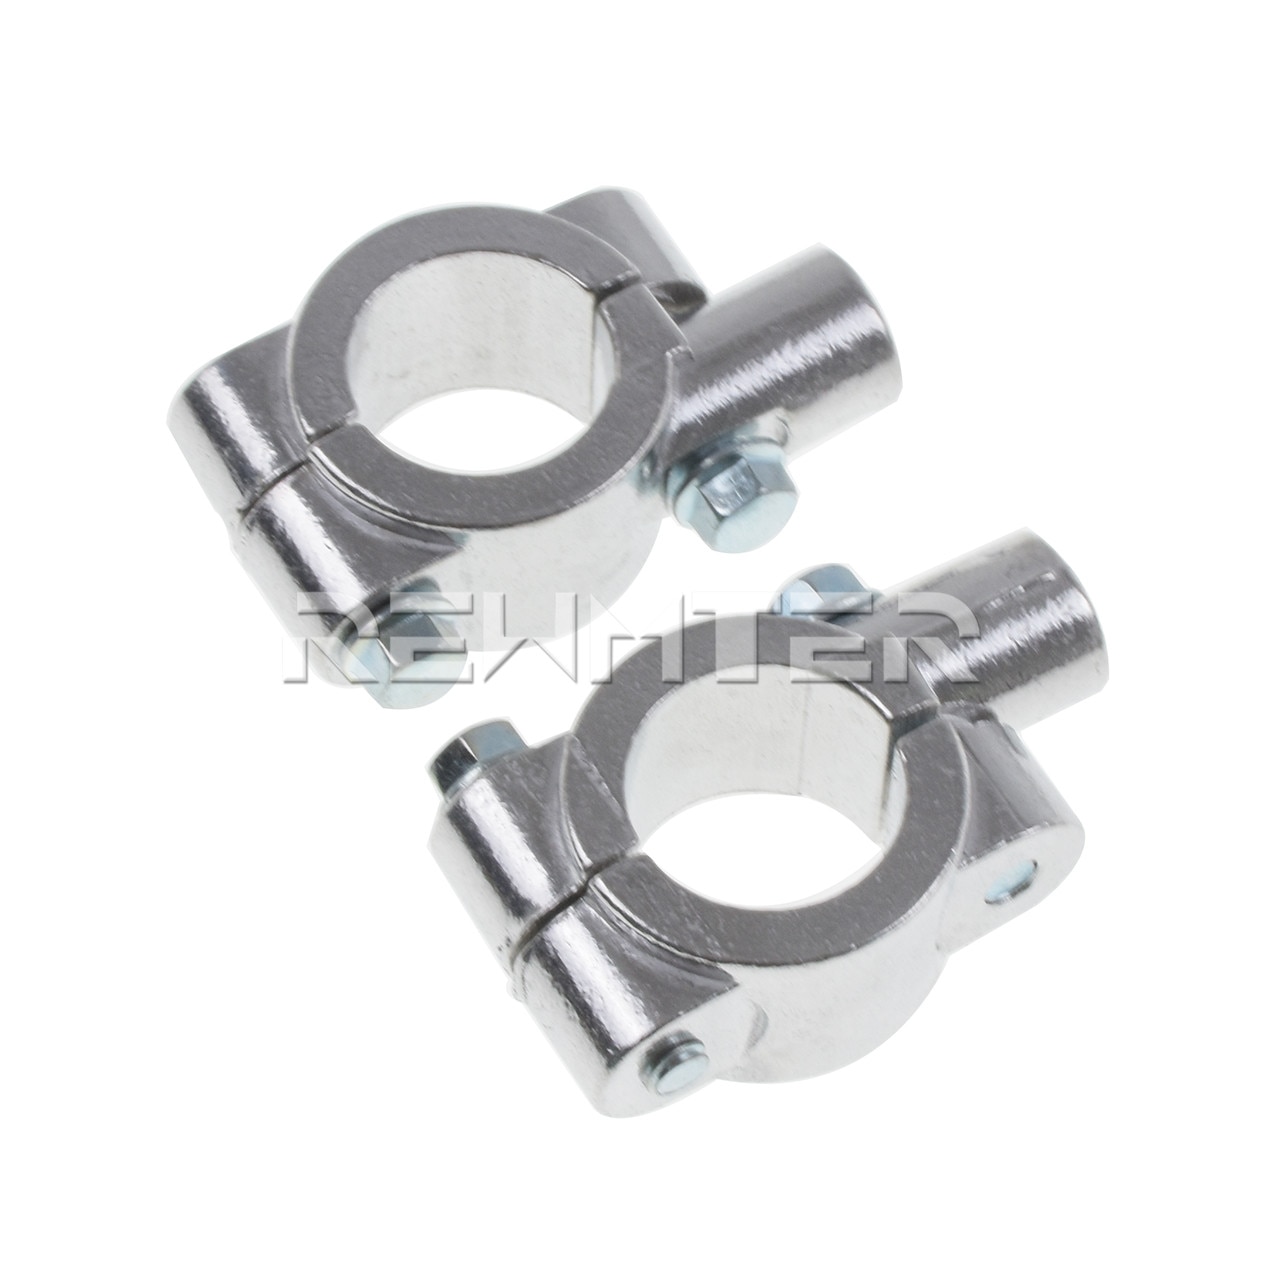 2PCS-Black-Silver-Motorcycle-accessories-Mirror-Mount-Clamp-Rear-View-Mirror-Holder-Size-22mm-10mm-8mm-4